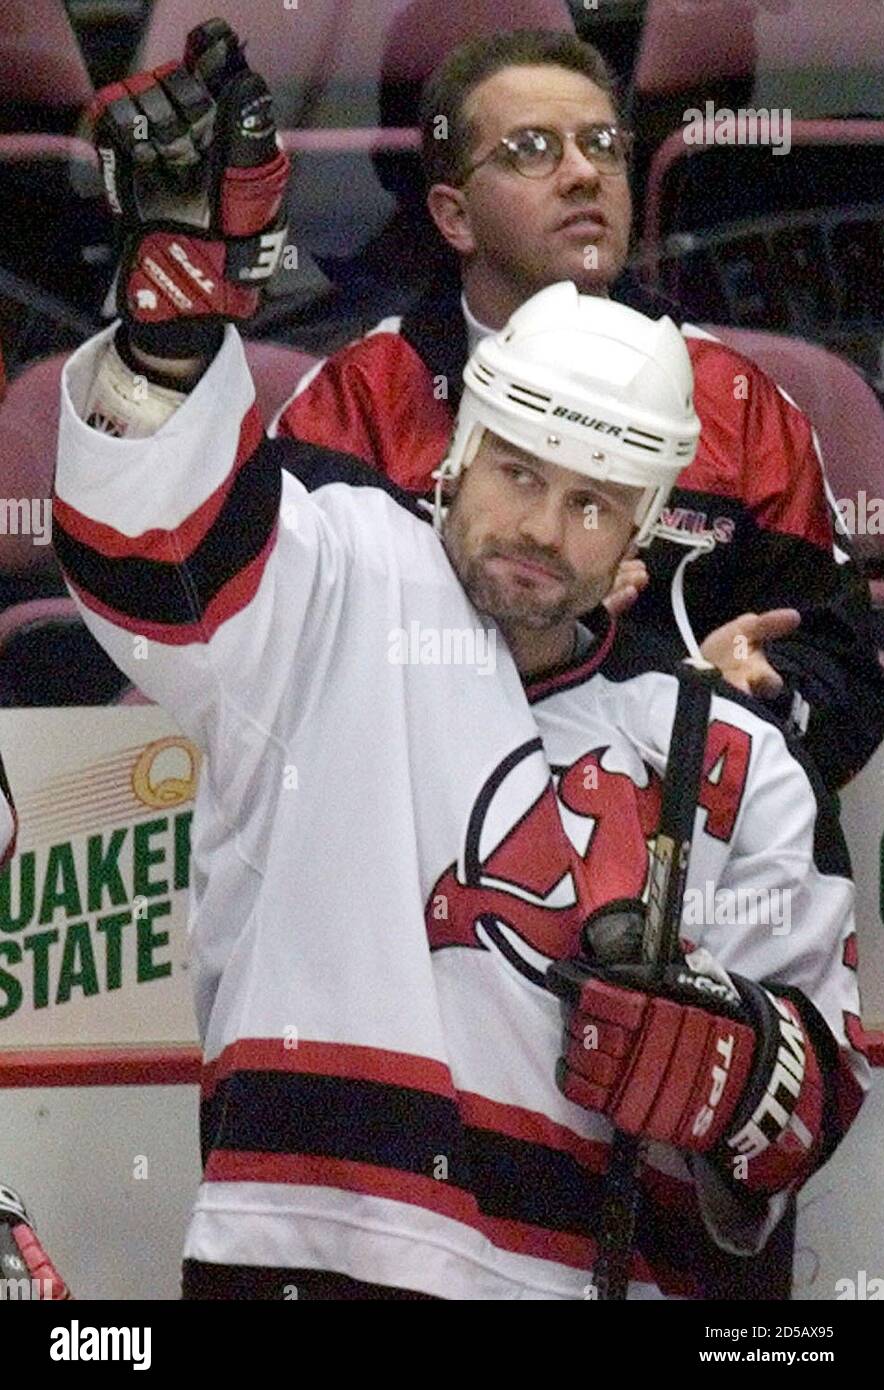 New Jersey Devils' defenseman Ken Daneyko (C) waves to the crowd as he is  announced before the Devils game with the Tampa Bay Lightning January 15 at  the Meadowlands Arena in East